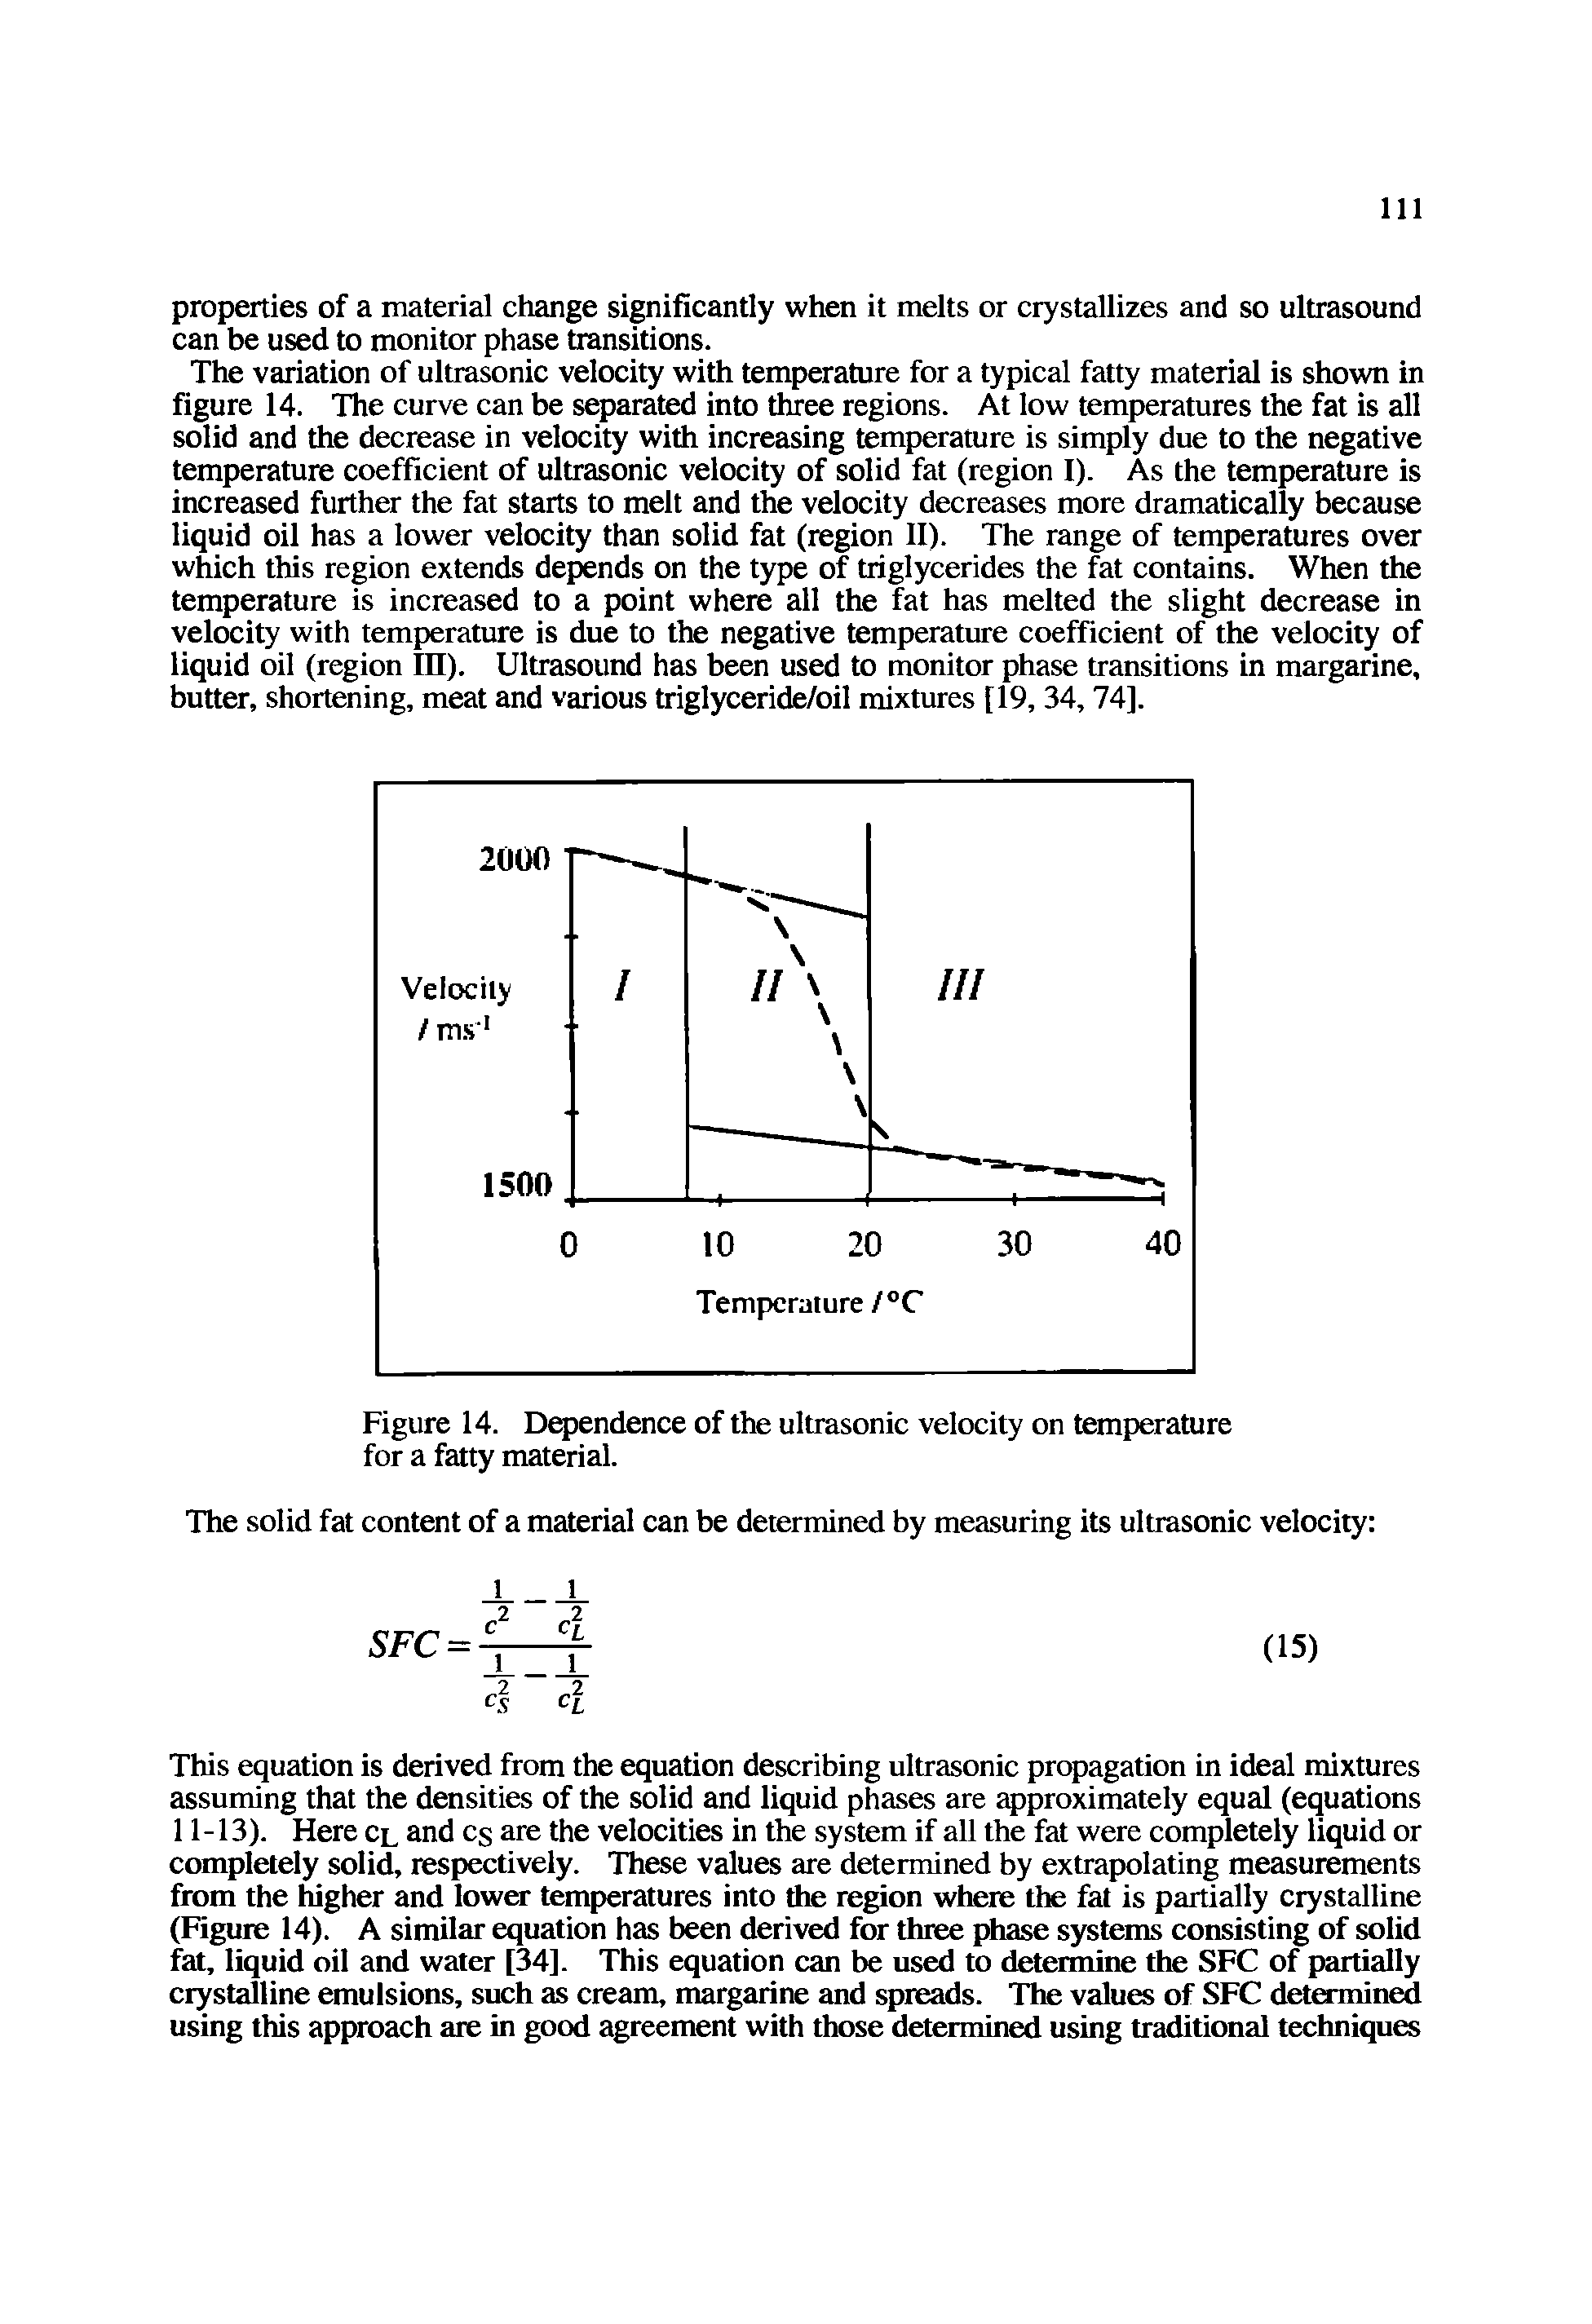 Figure 14. Dependence of the ultrasonic velocity on temperature for a fatty material.